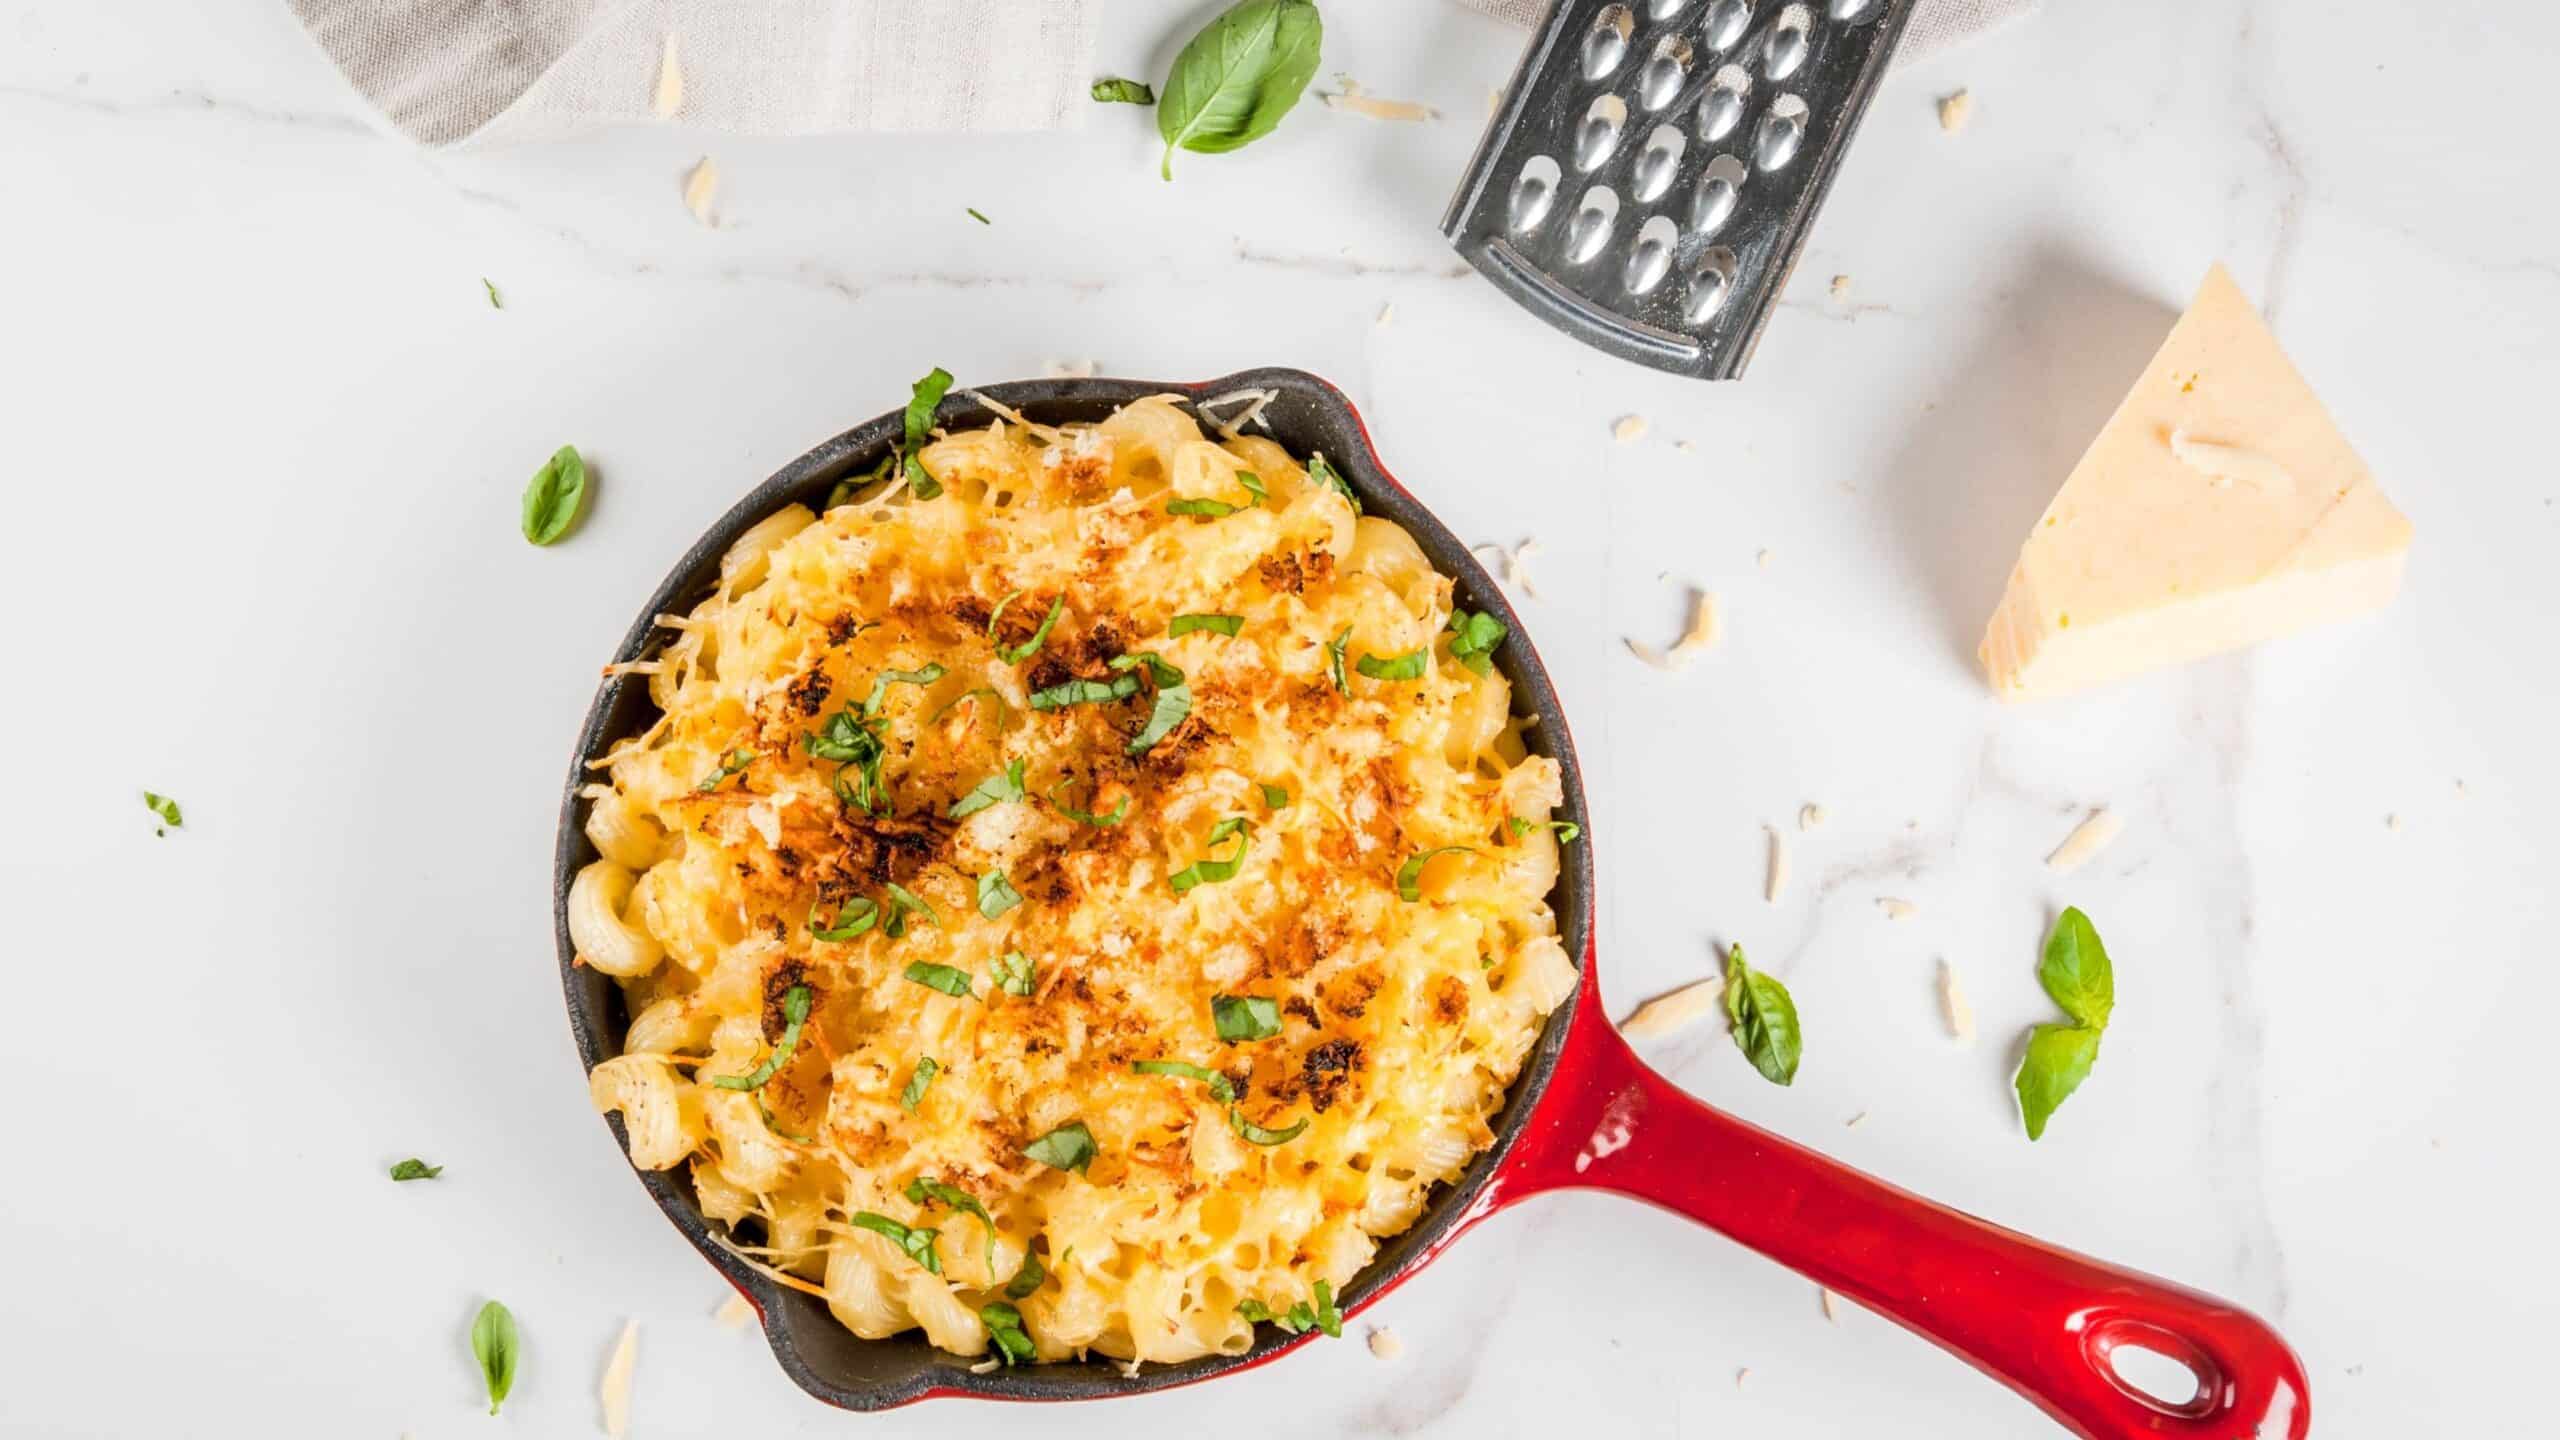 How To Thicken Mac And Cheese? Guide For A Creamy Mac And Cheese